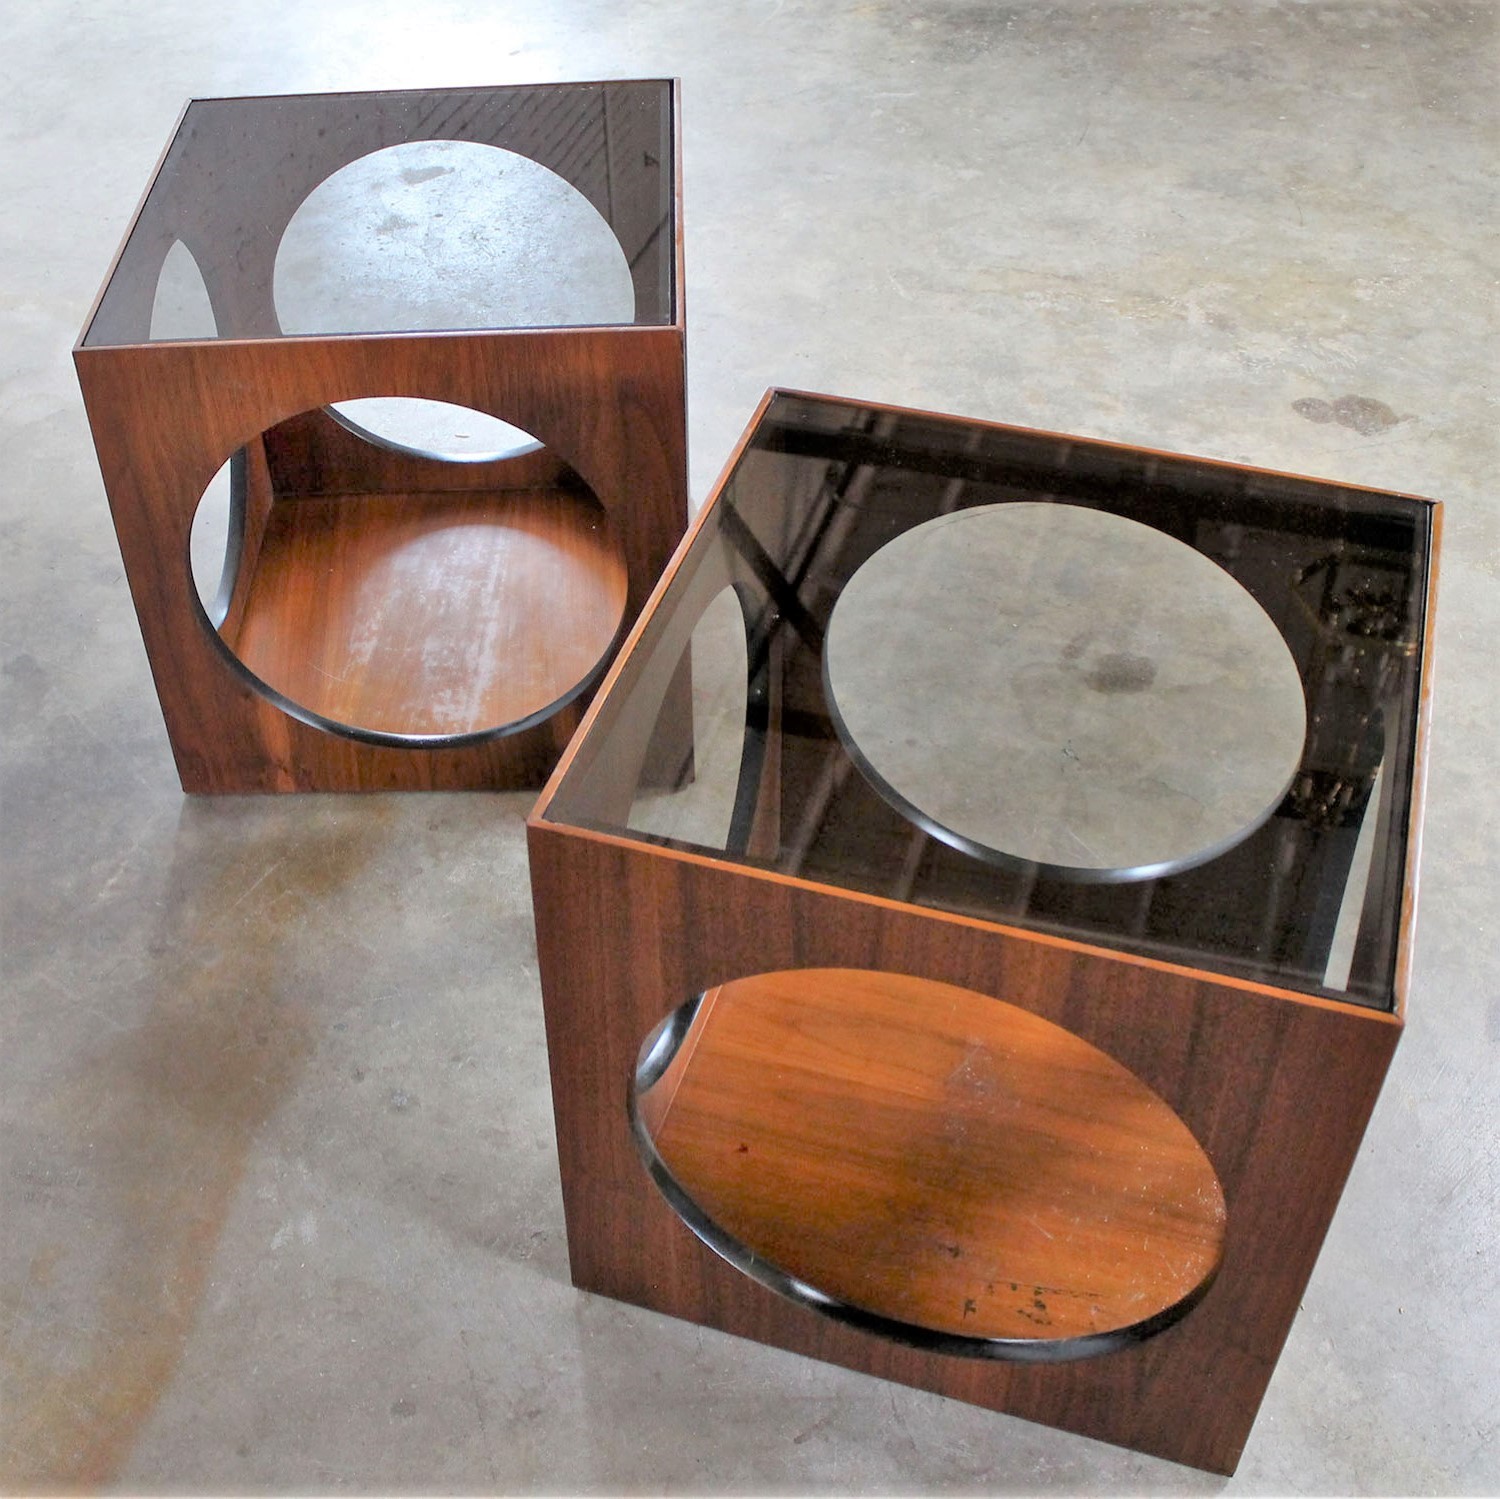 Vintage Pair Mid-Century Modern Lane Cube Tables with Circle Cut-Outs and Smoke Glass Tops